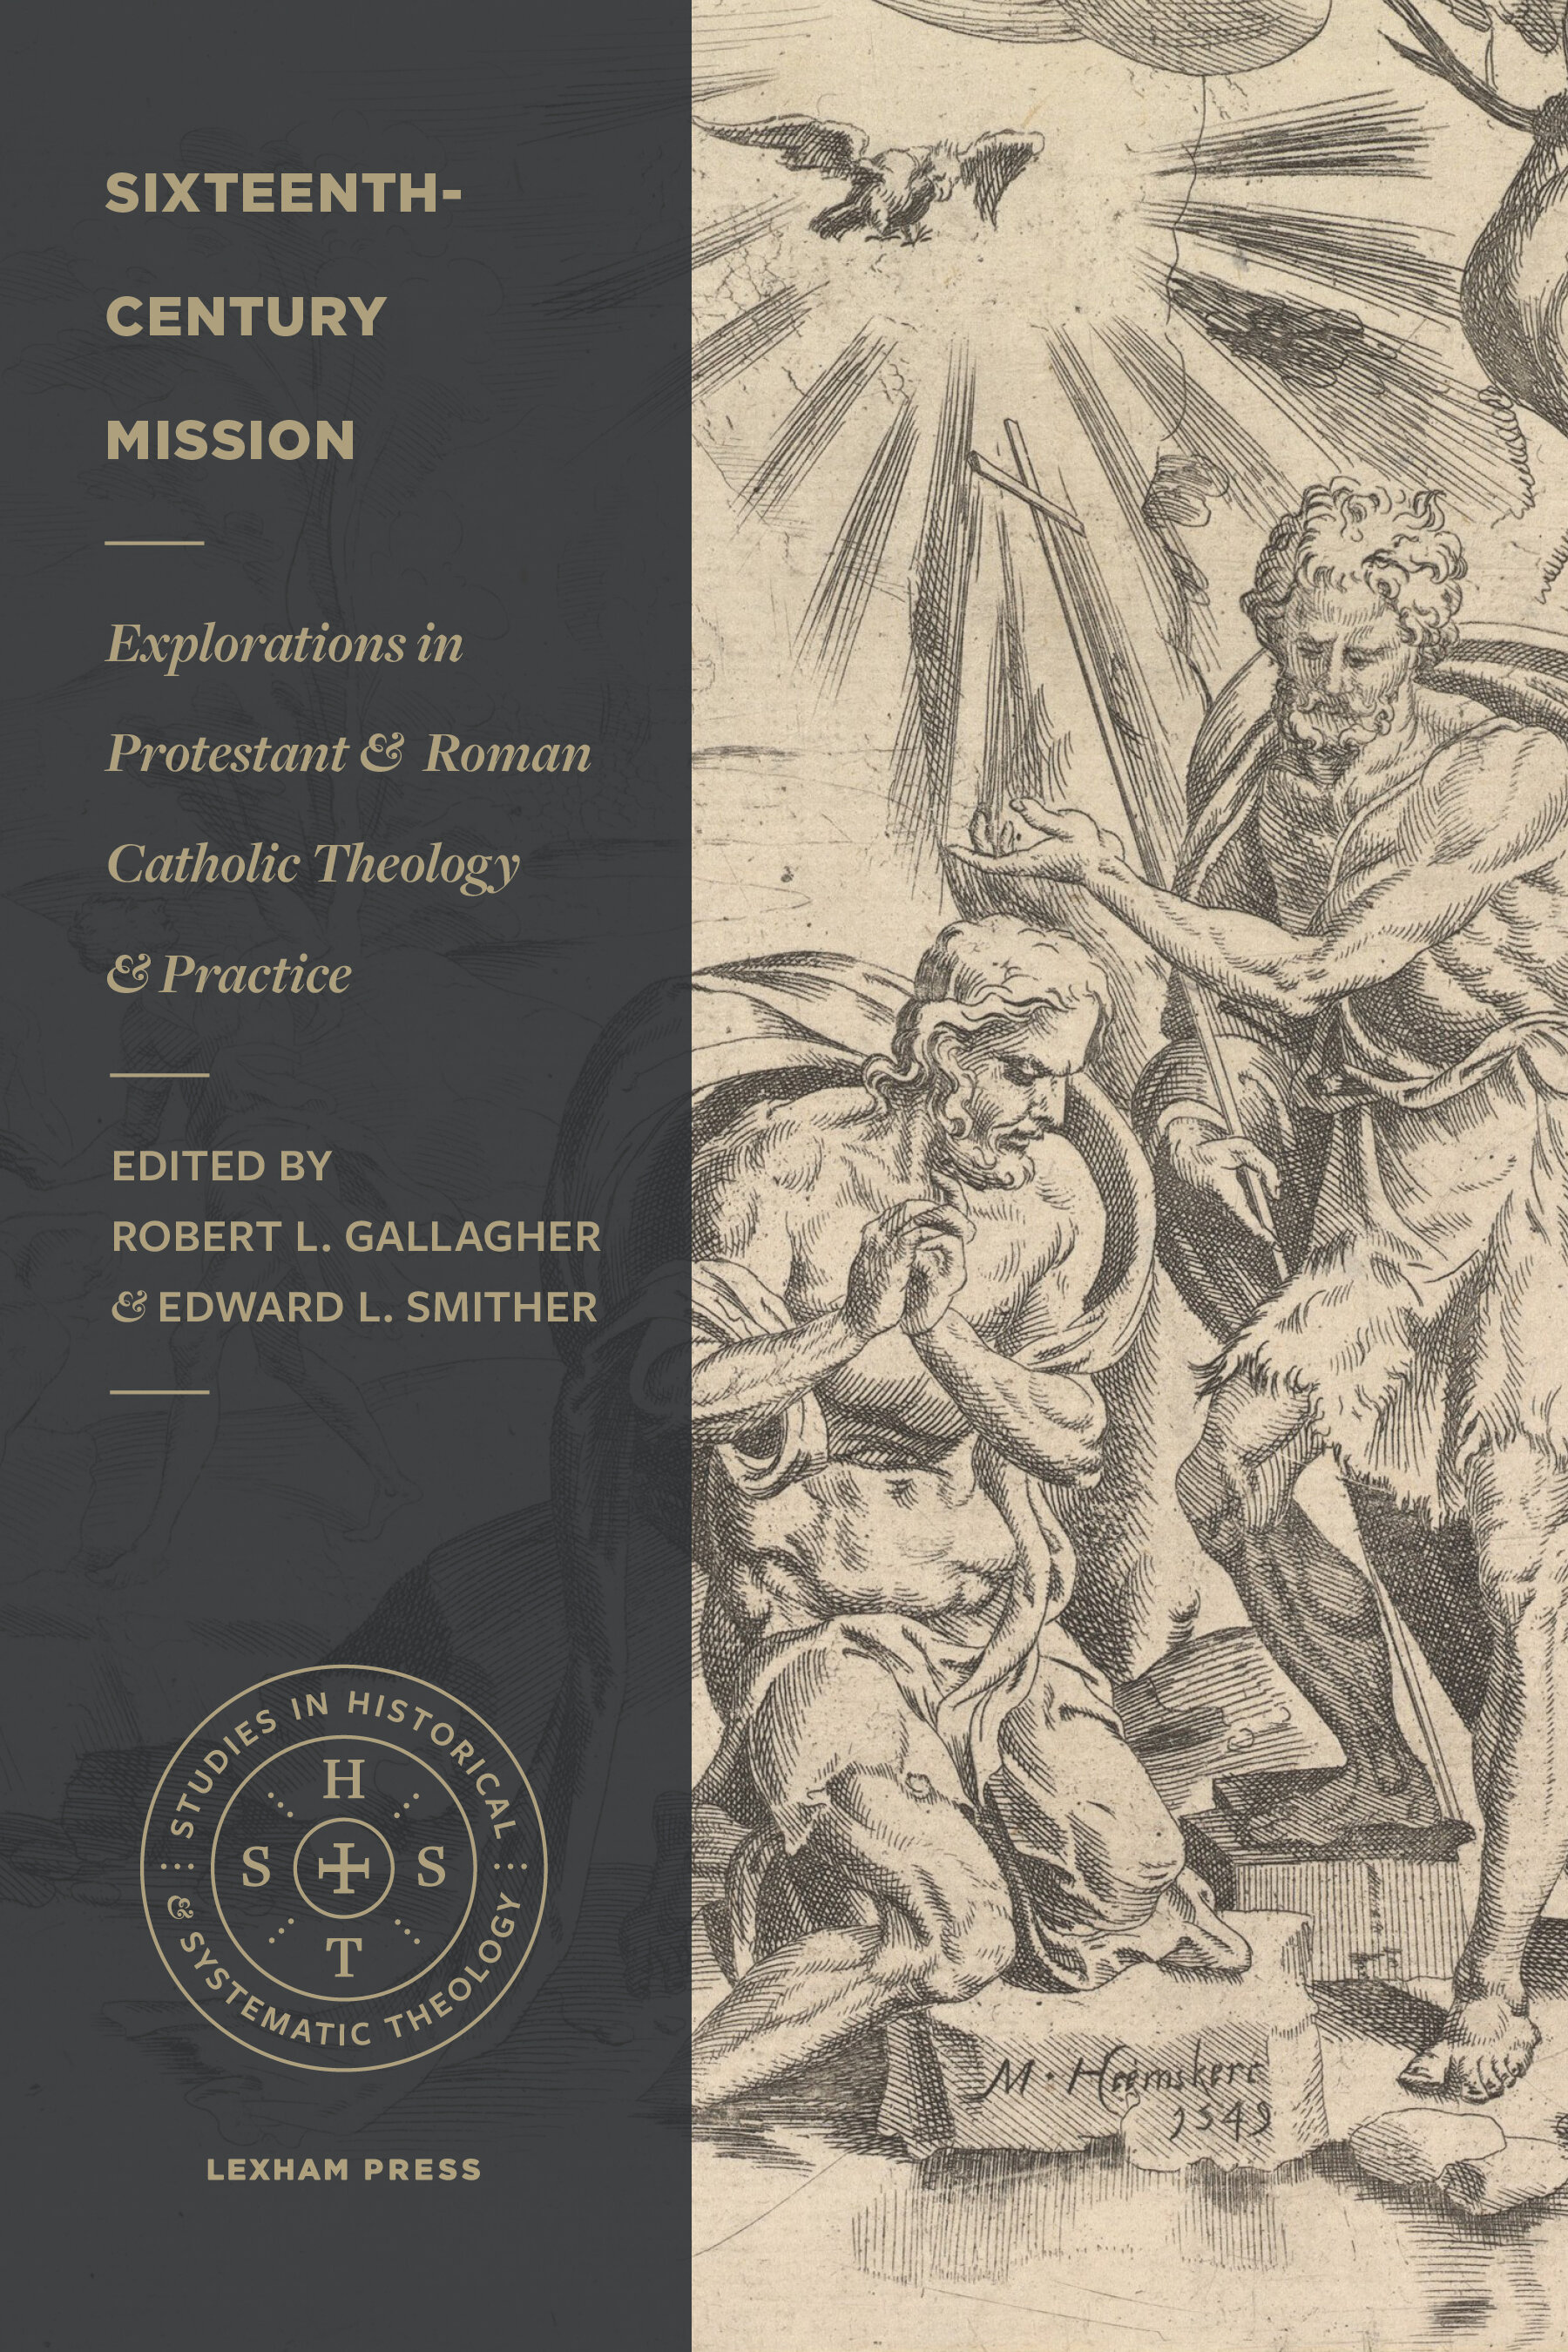 Sixteenth-Century Mission: Explorations in Protestant and Roman Catholic Theology and Practice